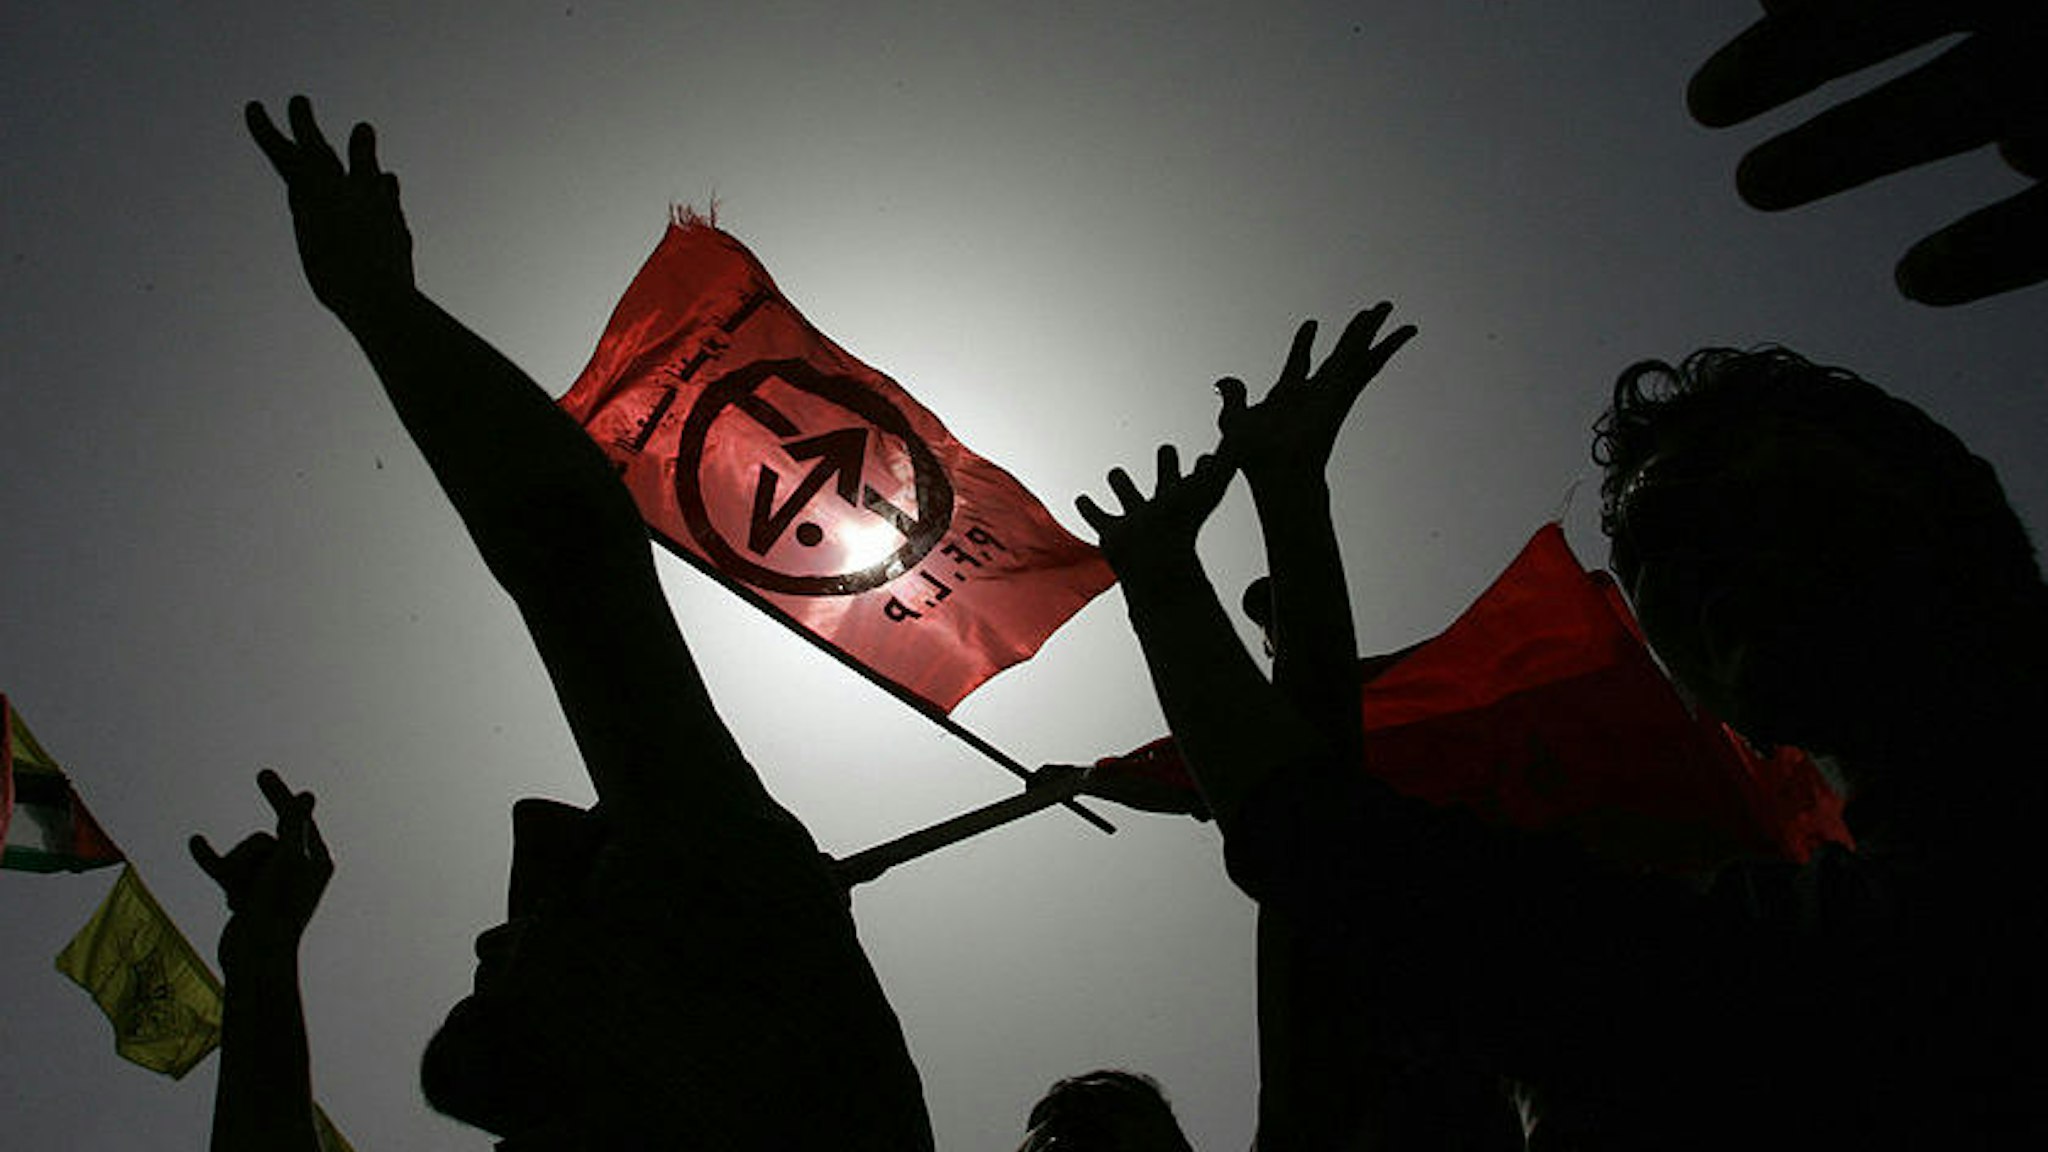 Supporters of the Popular Front for the Liberation Palestine hold up the PFLP red flag as they demonstrate at the Palestinian parliament in Gaza City 14 March 2006. Protests broke out across the West Bank and Gaza Strip as Israeli troops stormed a prison compound in the West Bank town of Jericho in a vast operation to arrest jailed militant Ahmed Saadat, the leader of the leftist Popular Front for the Liberation of Palestine and his three comrades held over the assassination in 2001of far-right Israeli tourism minister Rehavam Zeevi. A Palestinian security guard was killed and 18 others wounded in the Israeli attack. AFP PHOTO/MOHAMMED ABED (Photo credit should read MOHAMMED ABED/AFP via Getty Images)